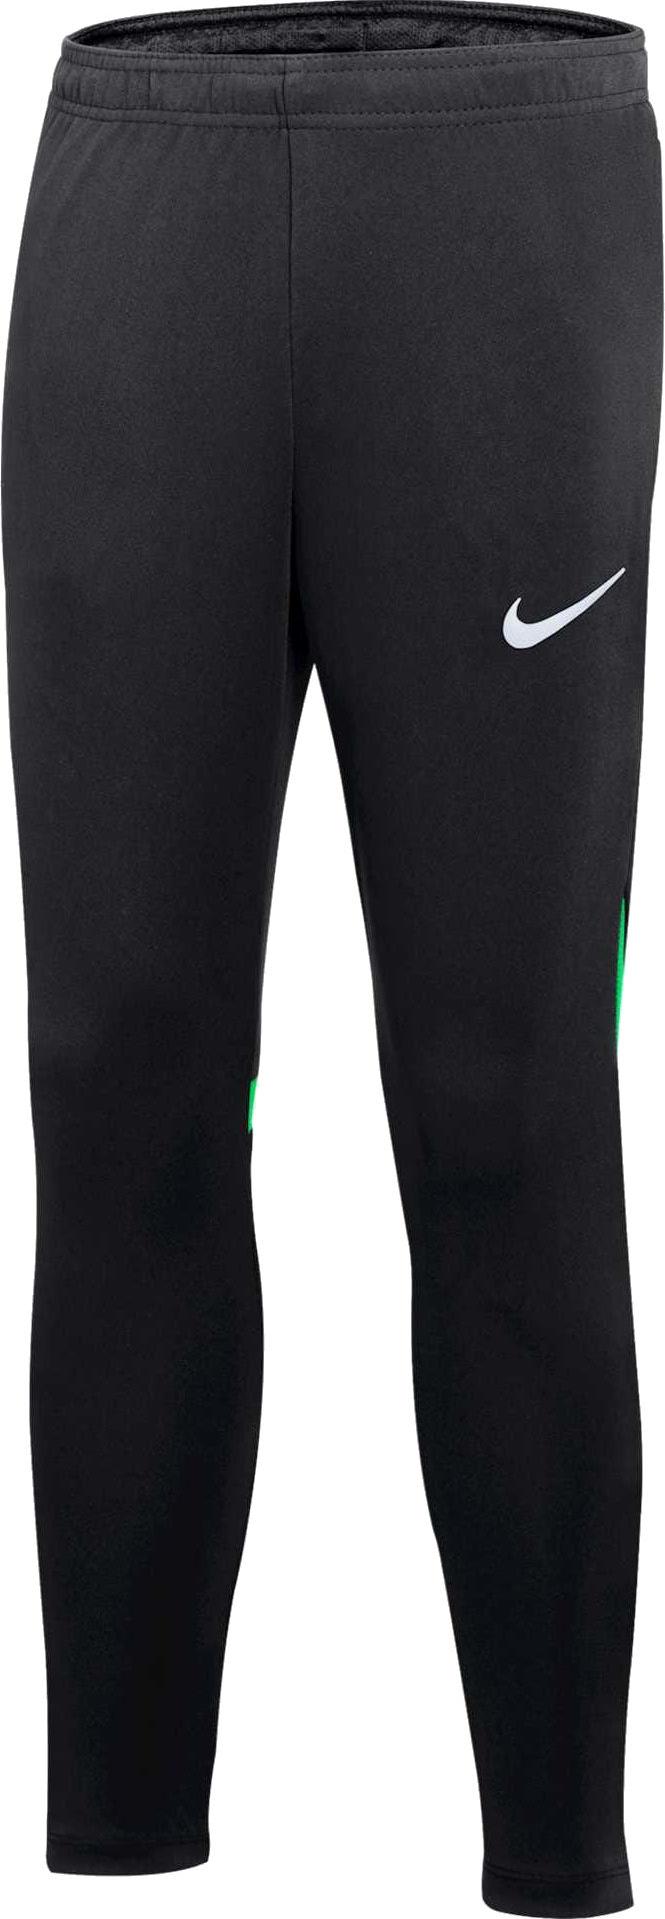 nike academy pro pant youth 412906 dh9325 011